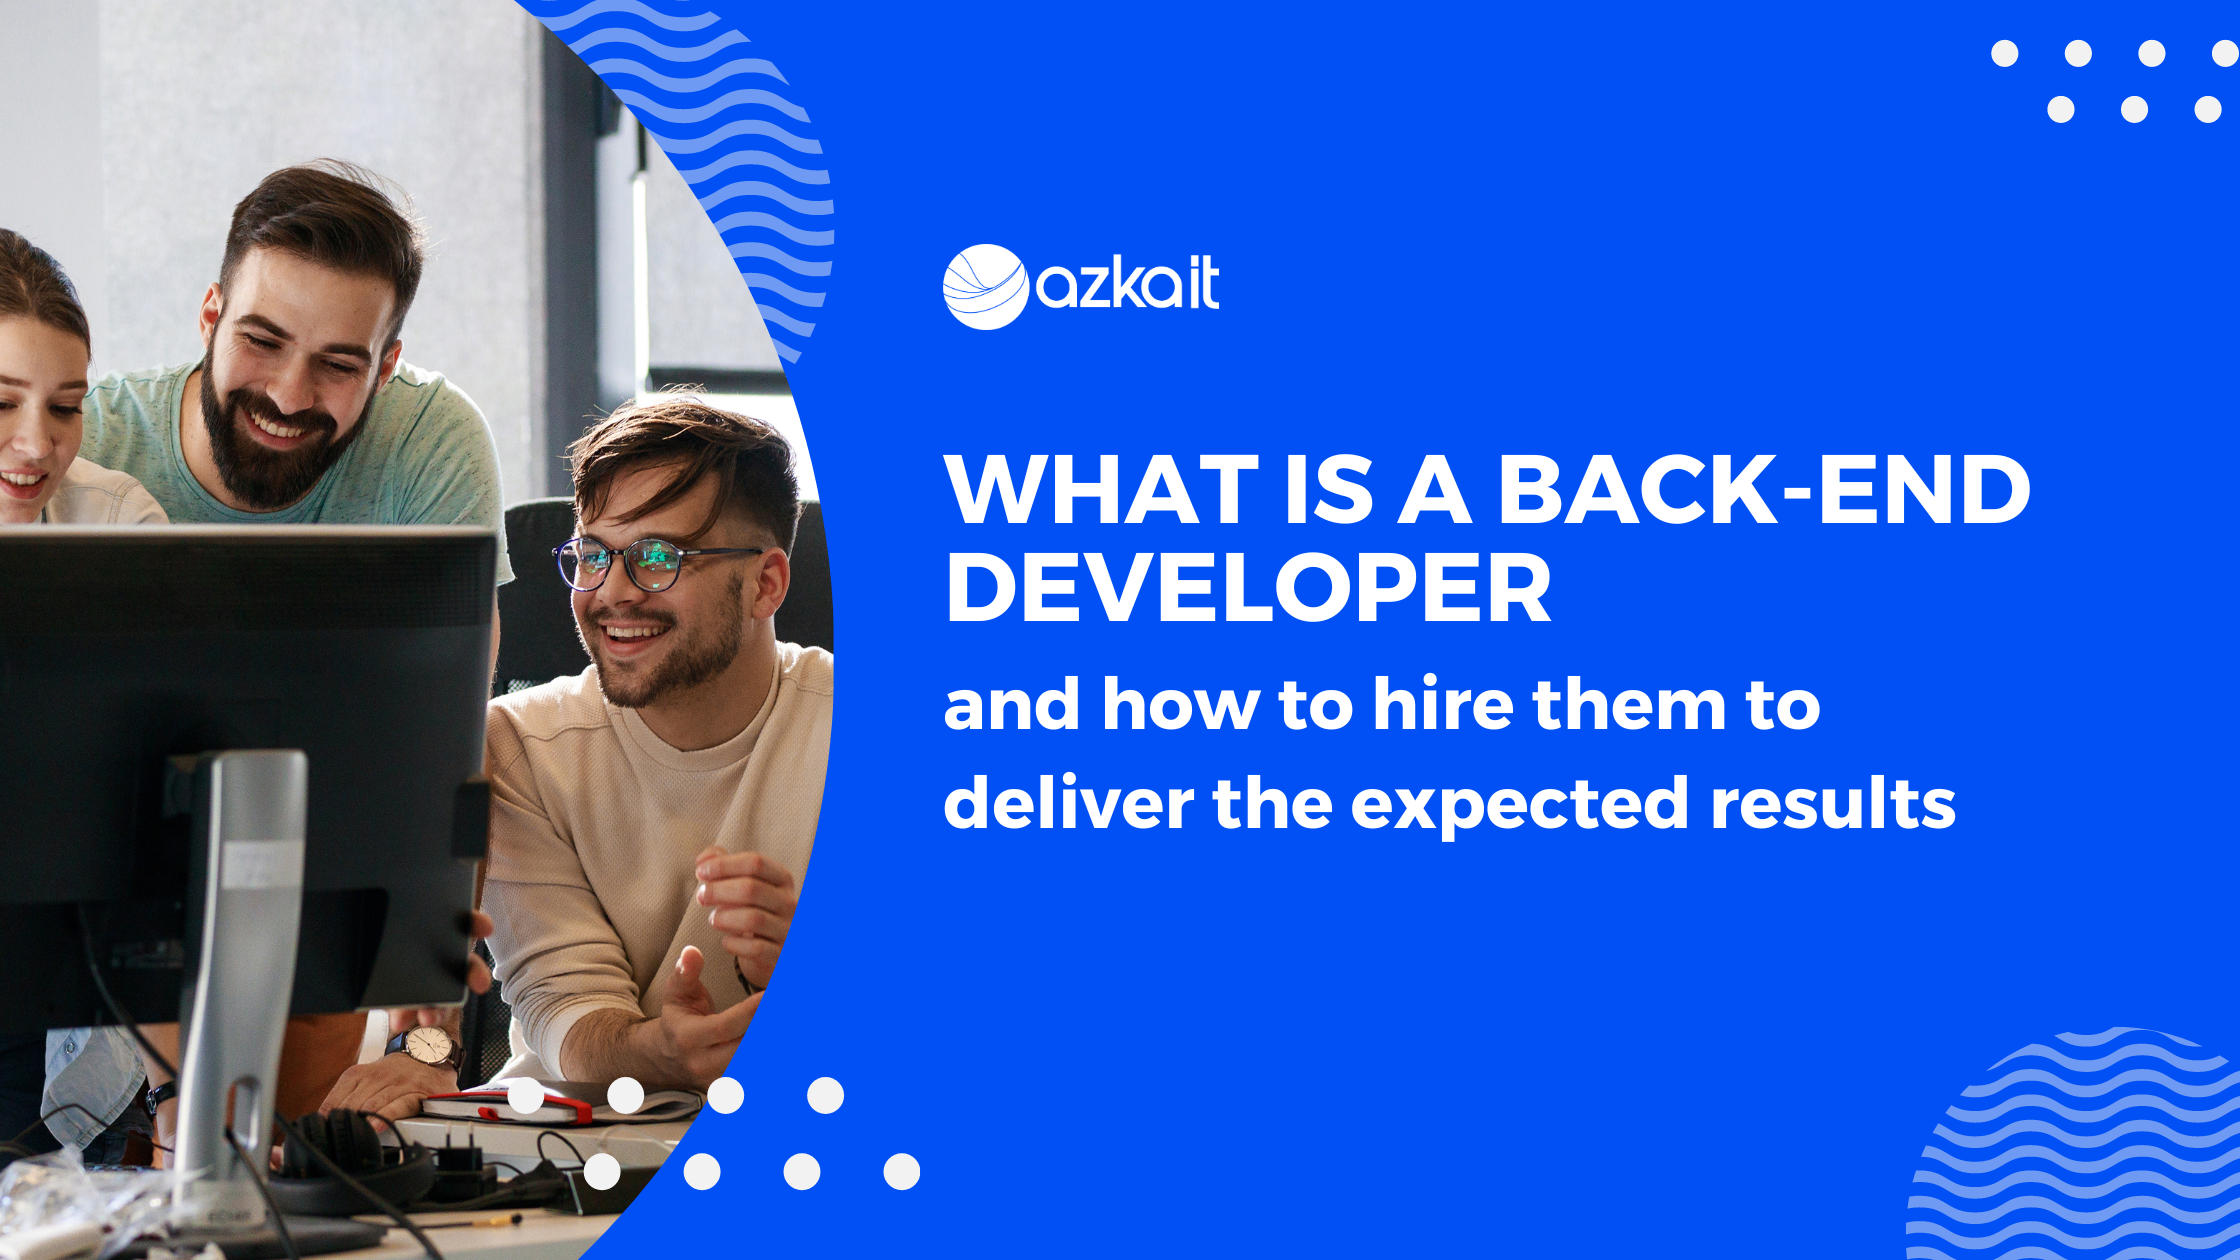 What is a back-end developer and how to hire them to deliver the expected results